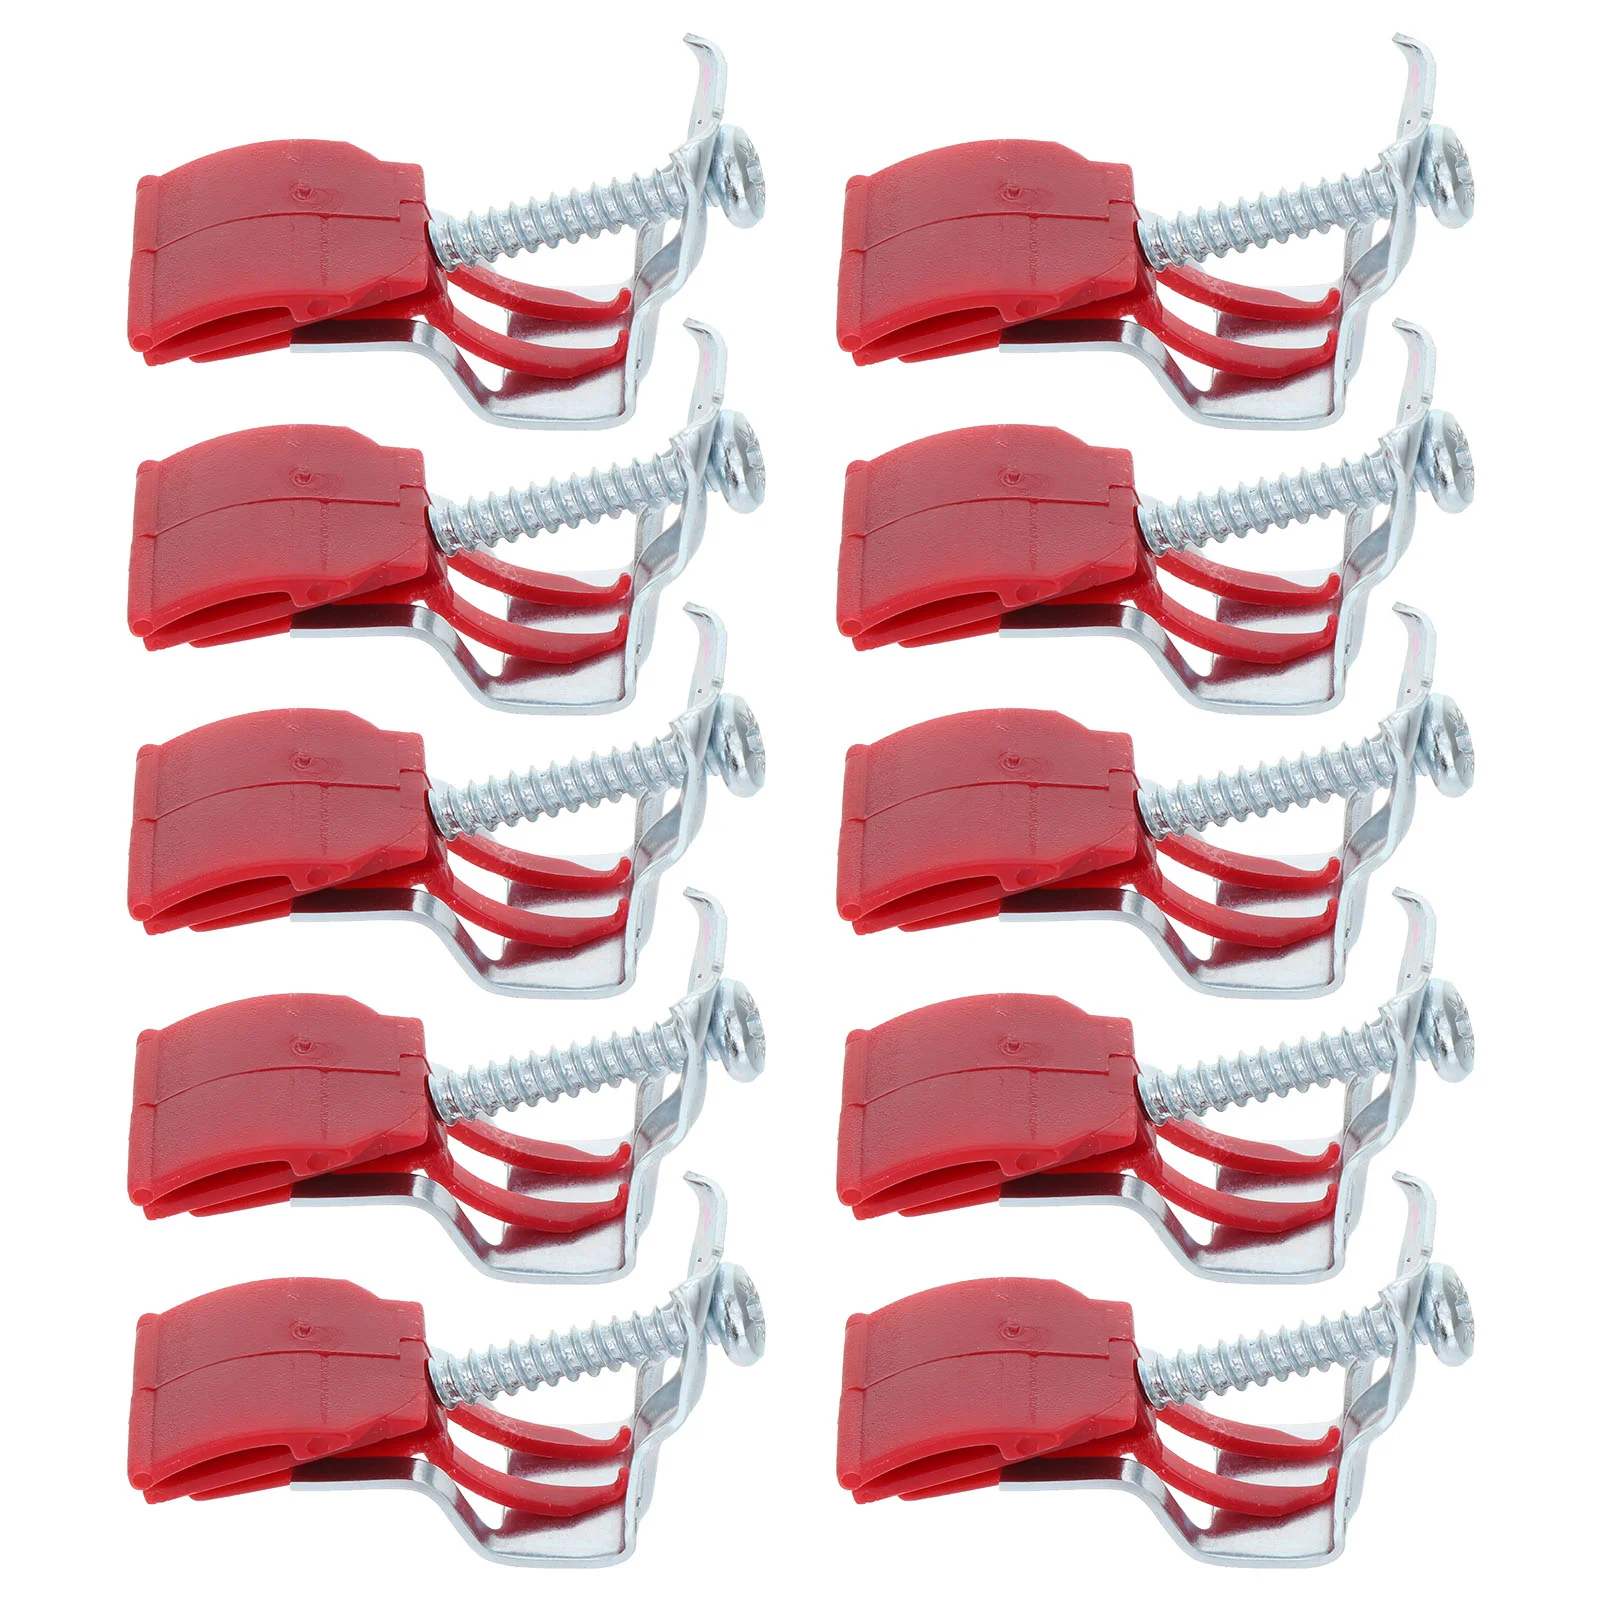 

10 Pcs Sink Mounting Clips Stainless Sewer Supply Rack Bow Installation Plastic Kitchen Tools Parts Supplies Accessories